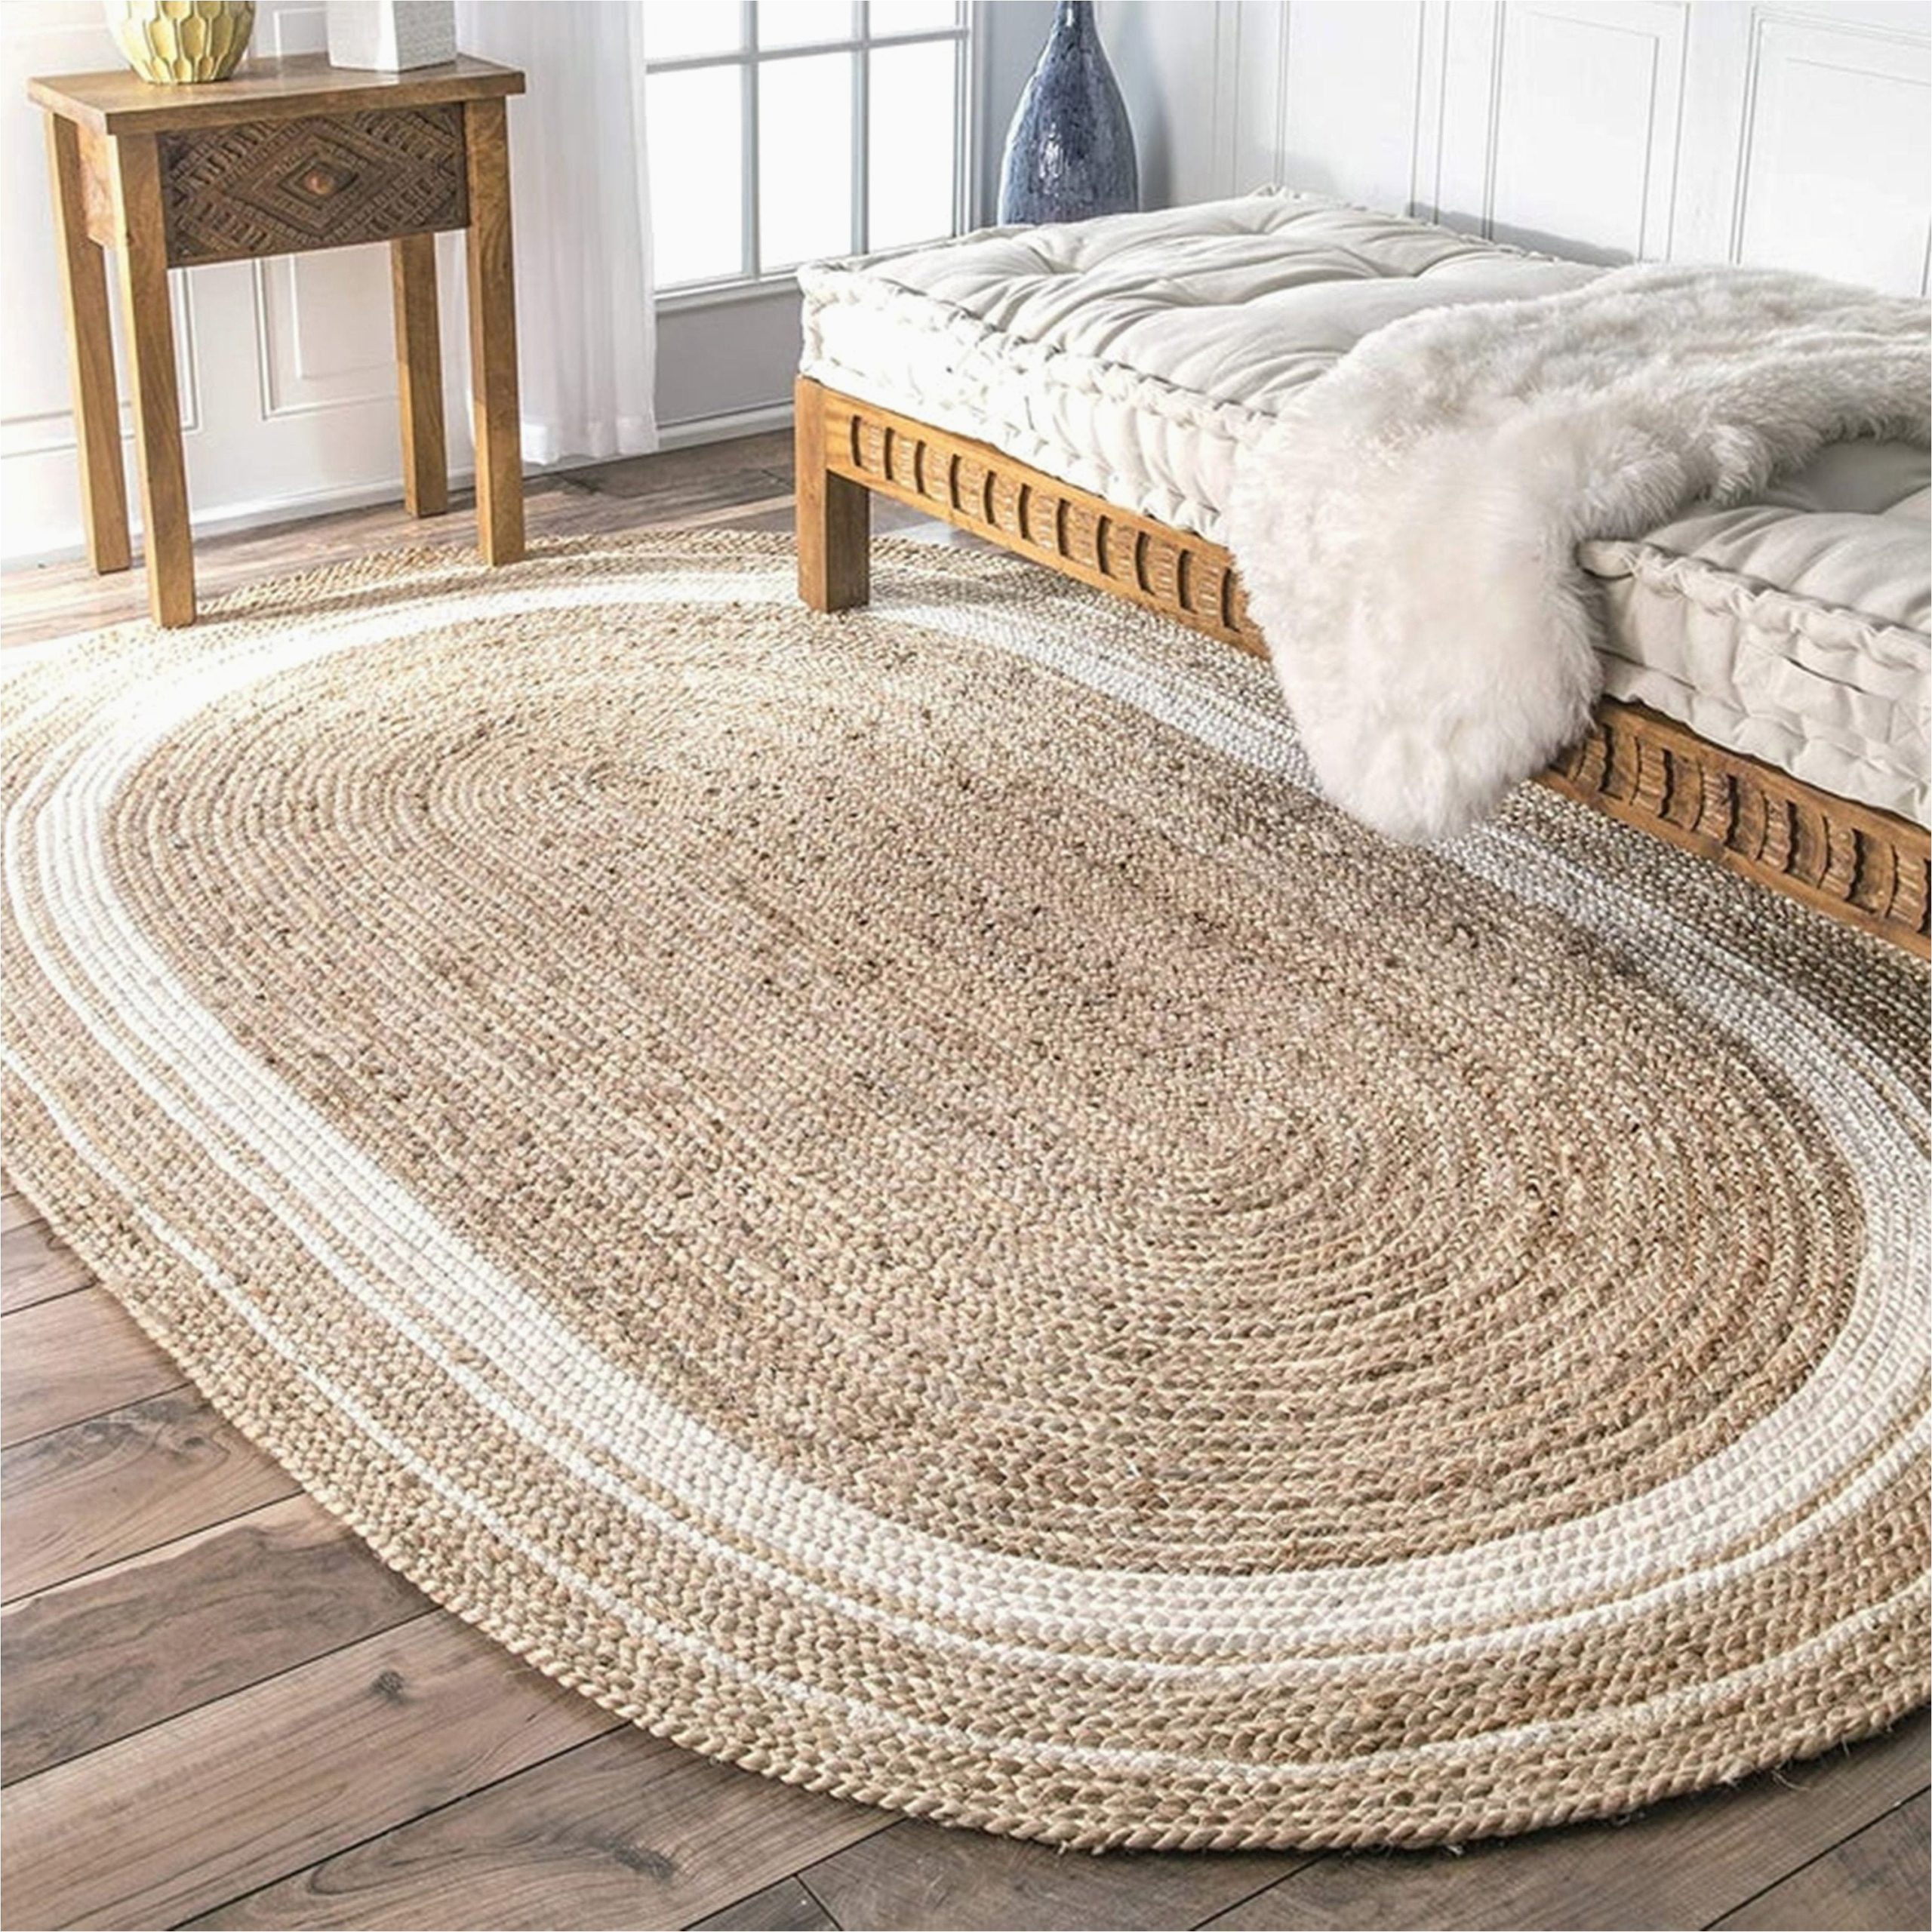 Oval area Rugs 9 X 12 8×10 9×12 10×14 Ft. White & Beige Colorful Oval Braided – Etsy